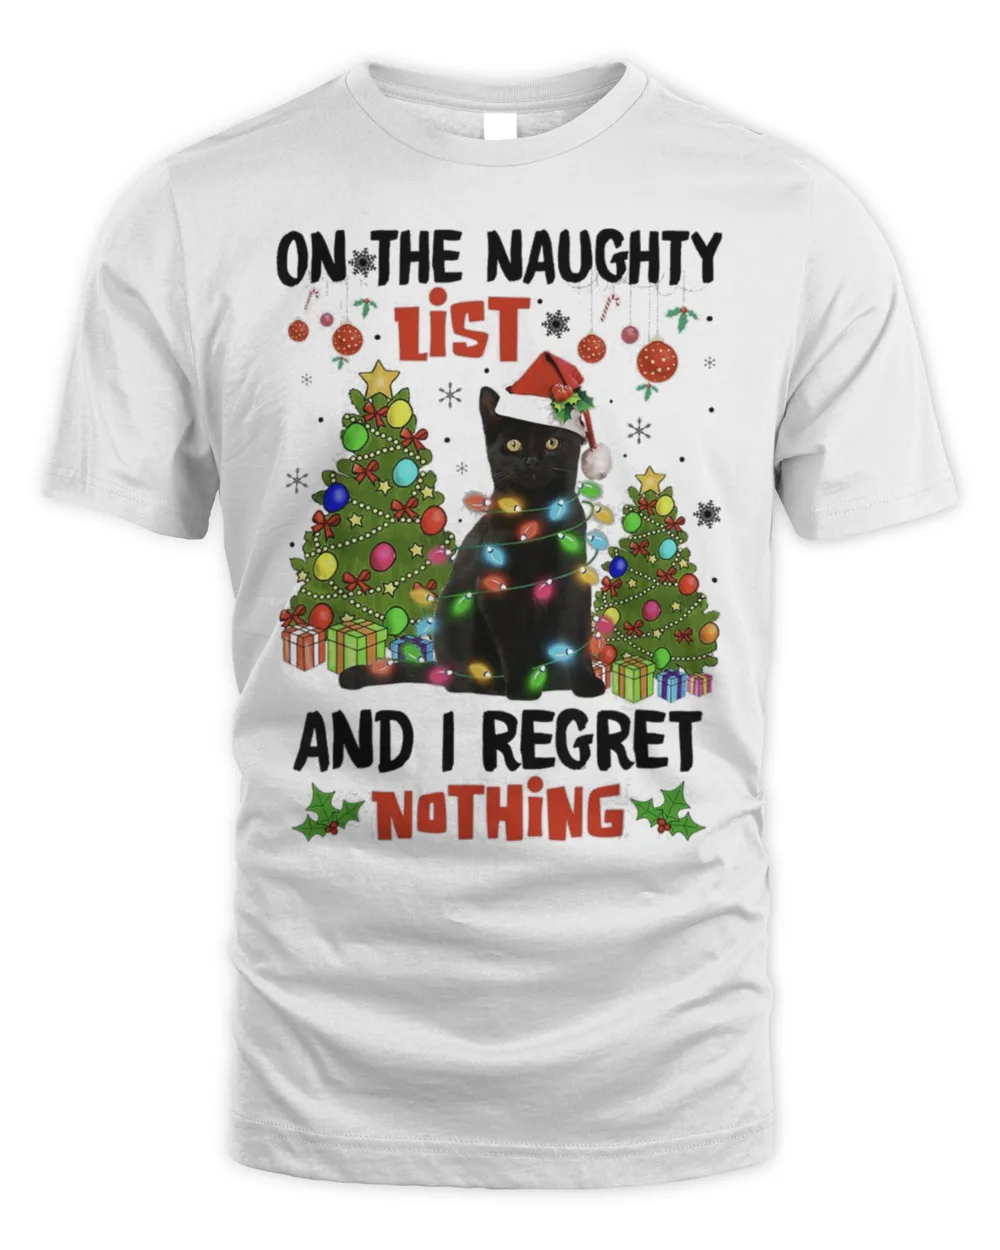 On The Naughty List And I Regret Nothing Cat Christmas Shirt Unisex Standard T-Shirt white xl